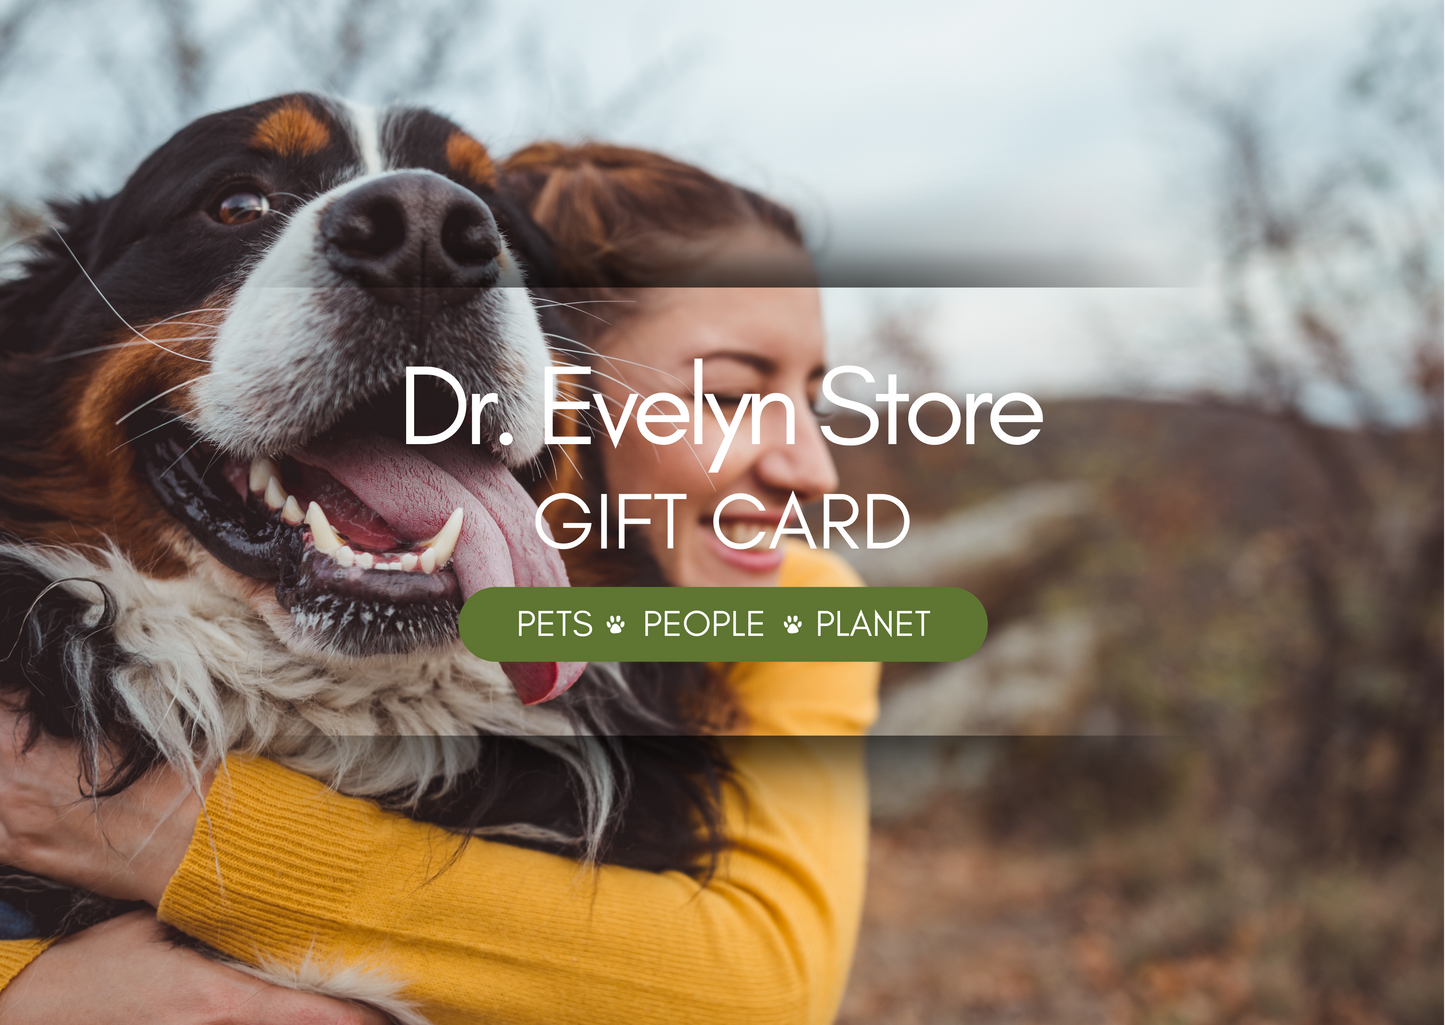 Dr. Evelyn Store Gift Card